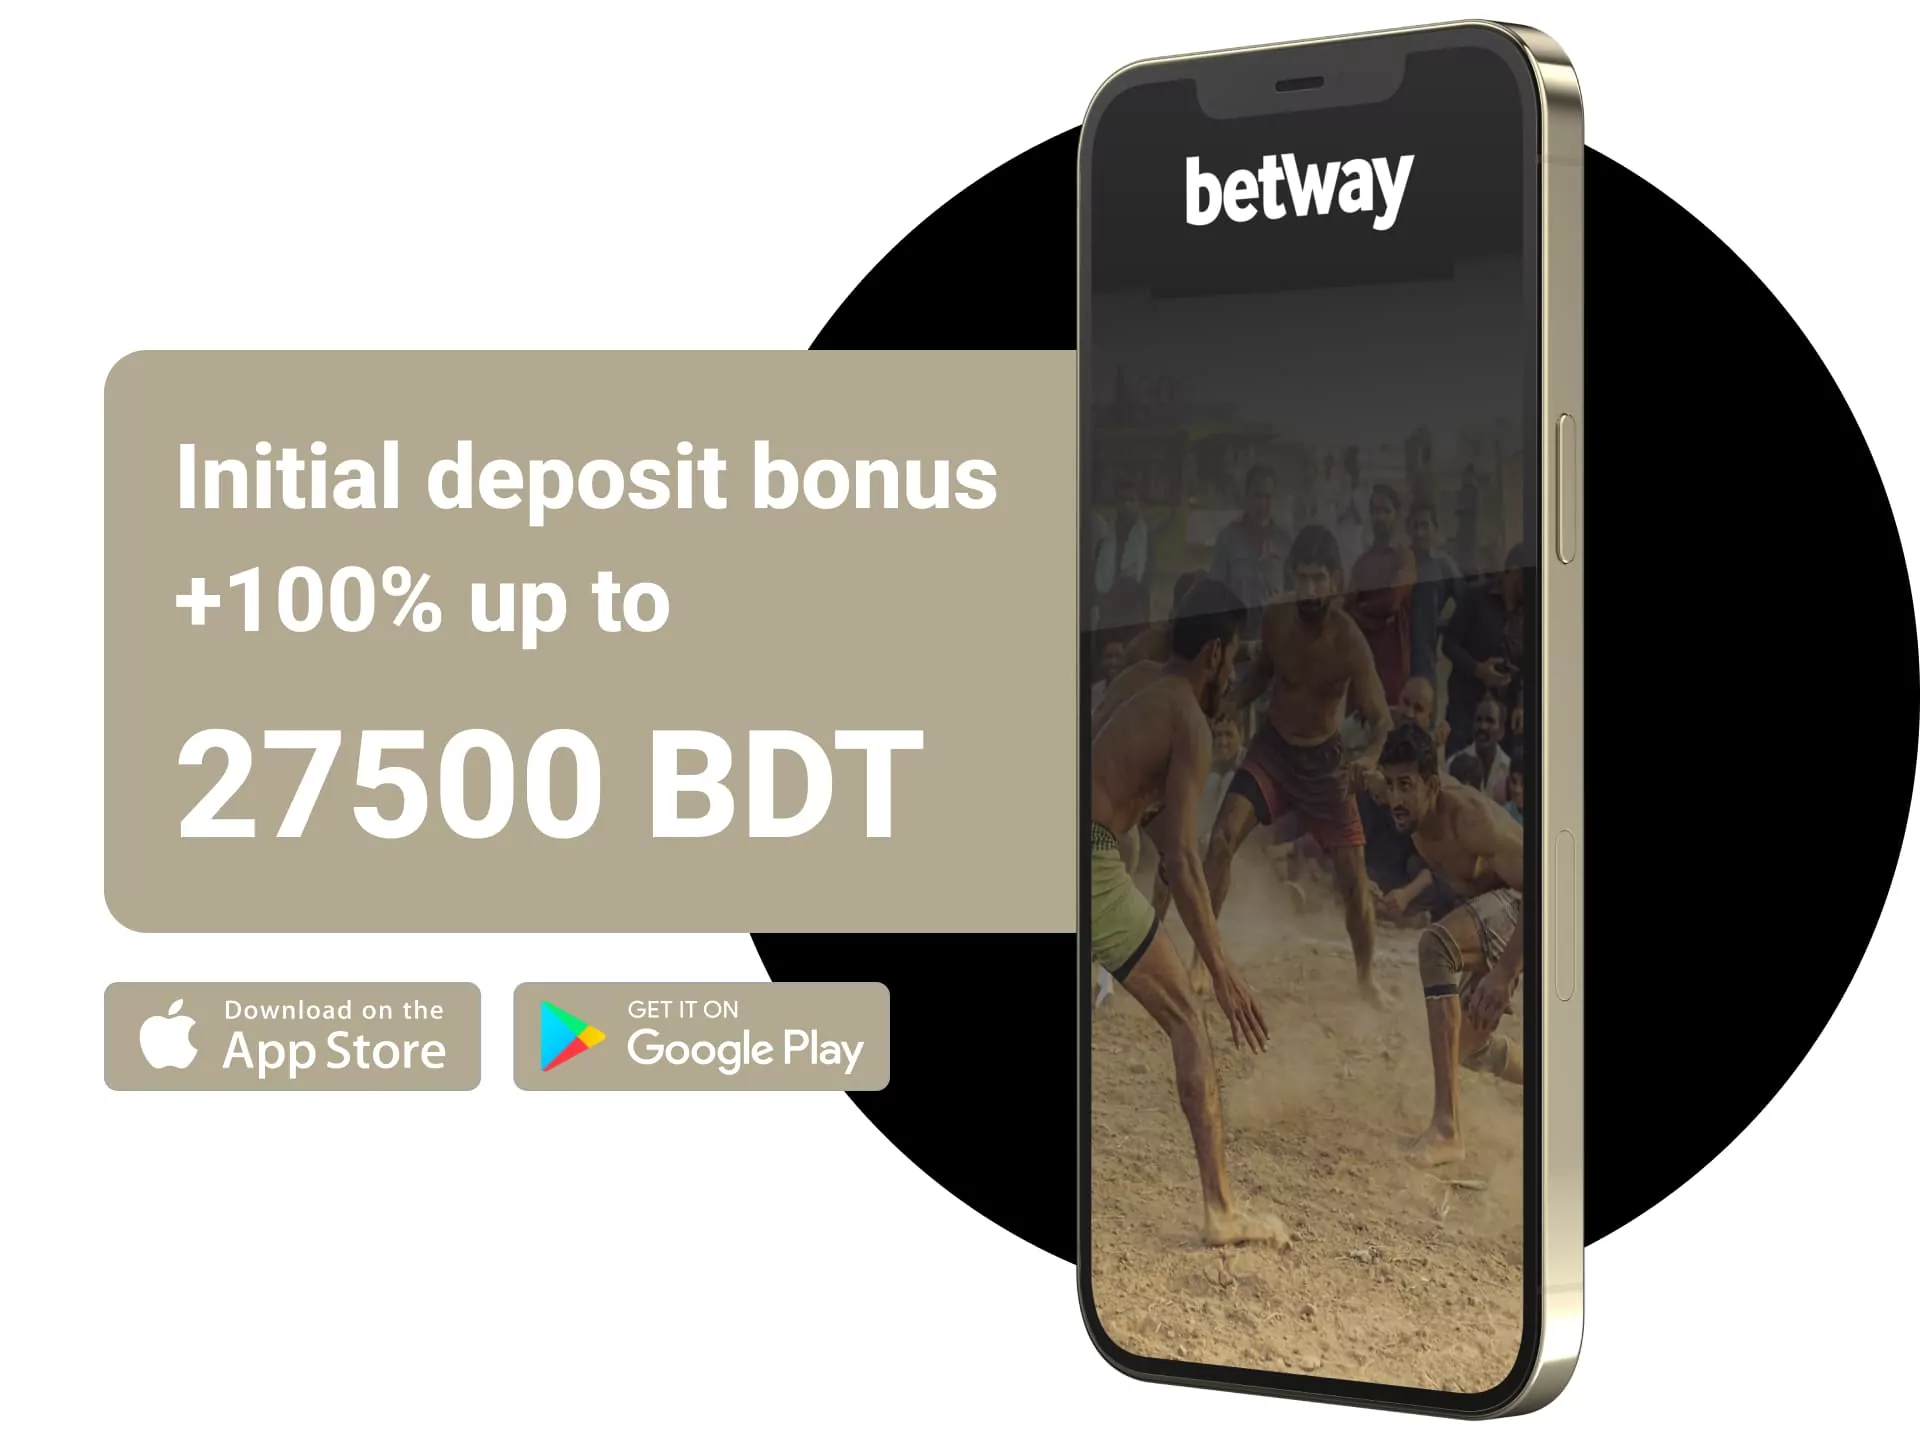 Betway betting company gives welcome bonus up to 2,800 BDT for kabaddi betting.